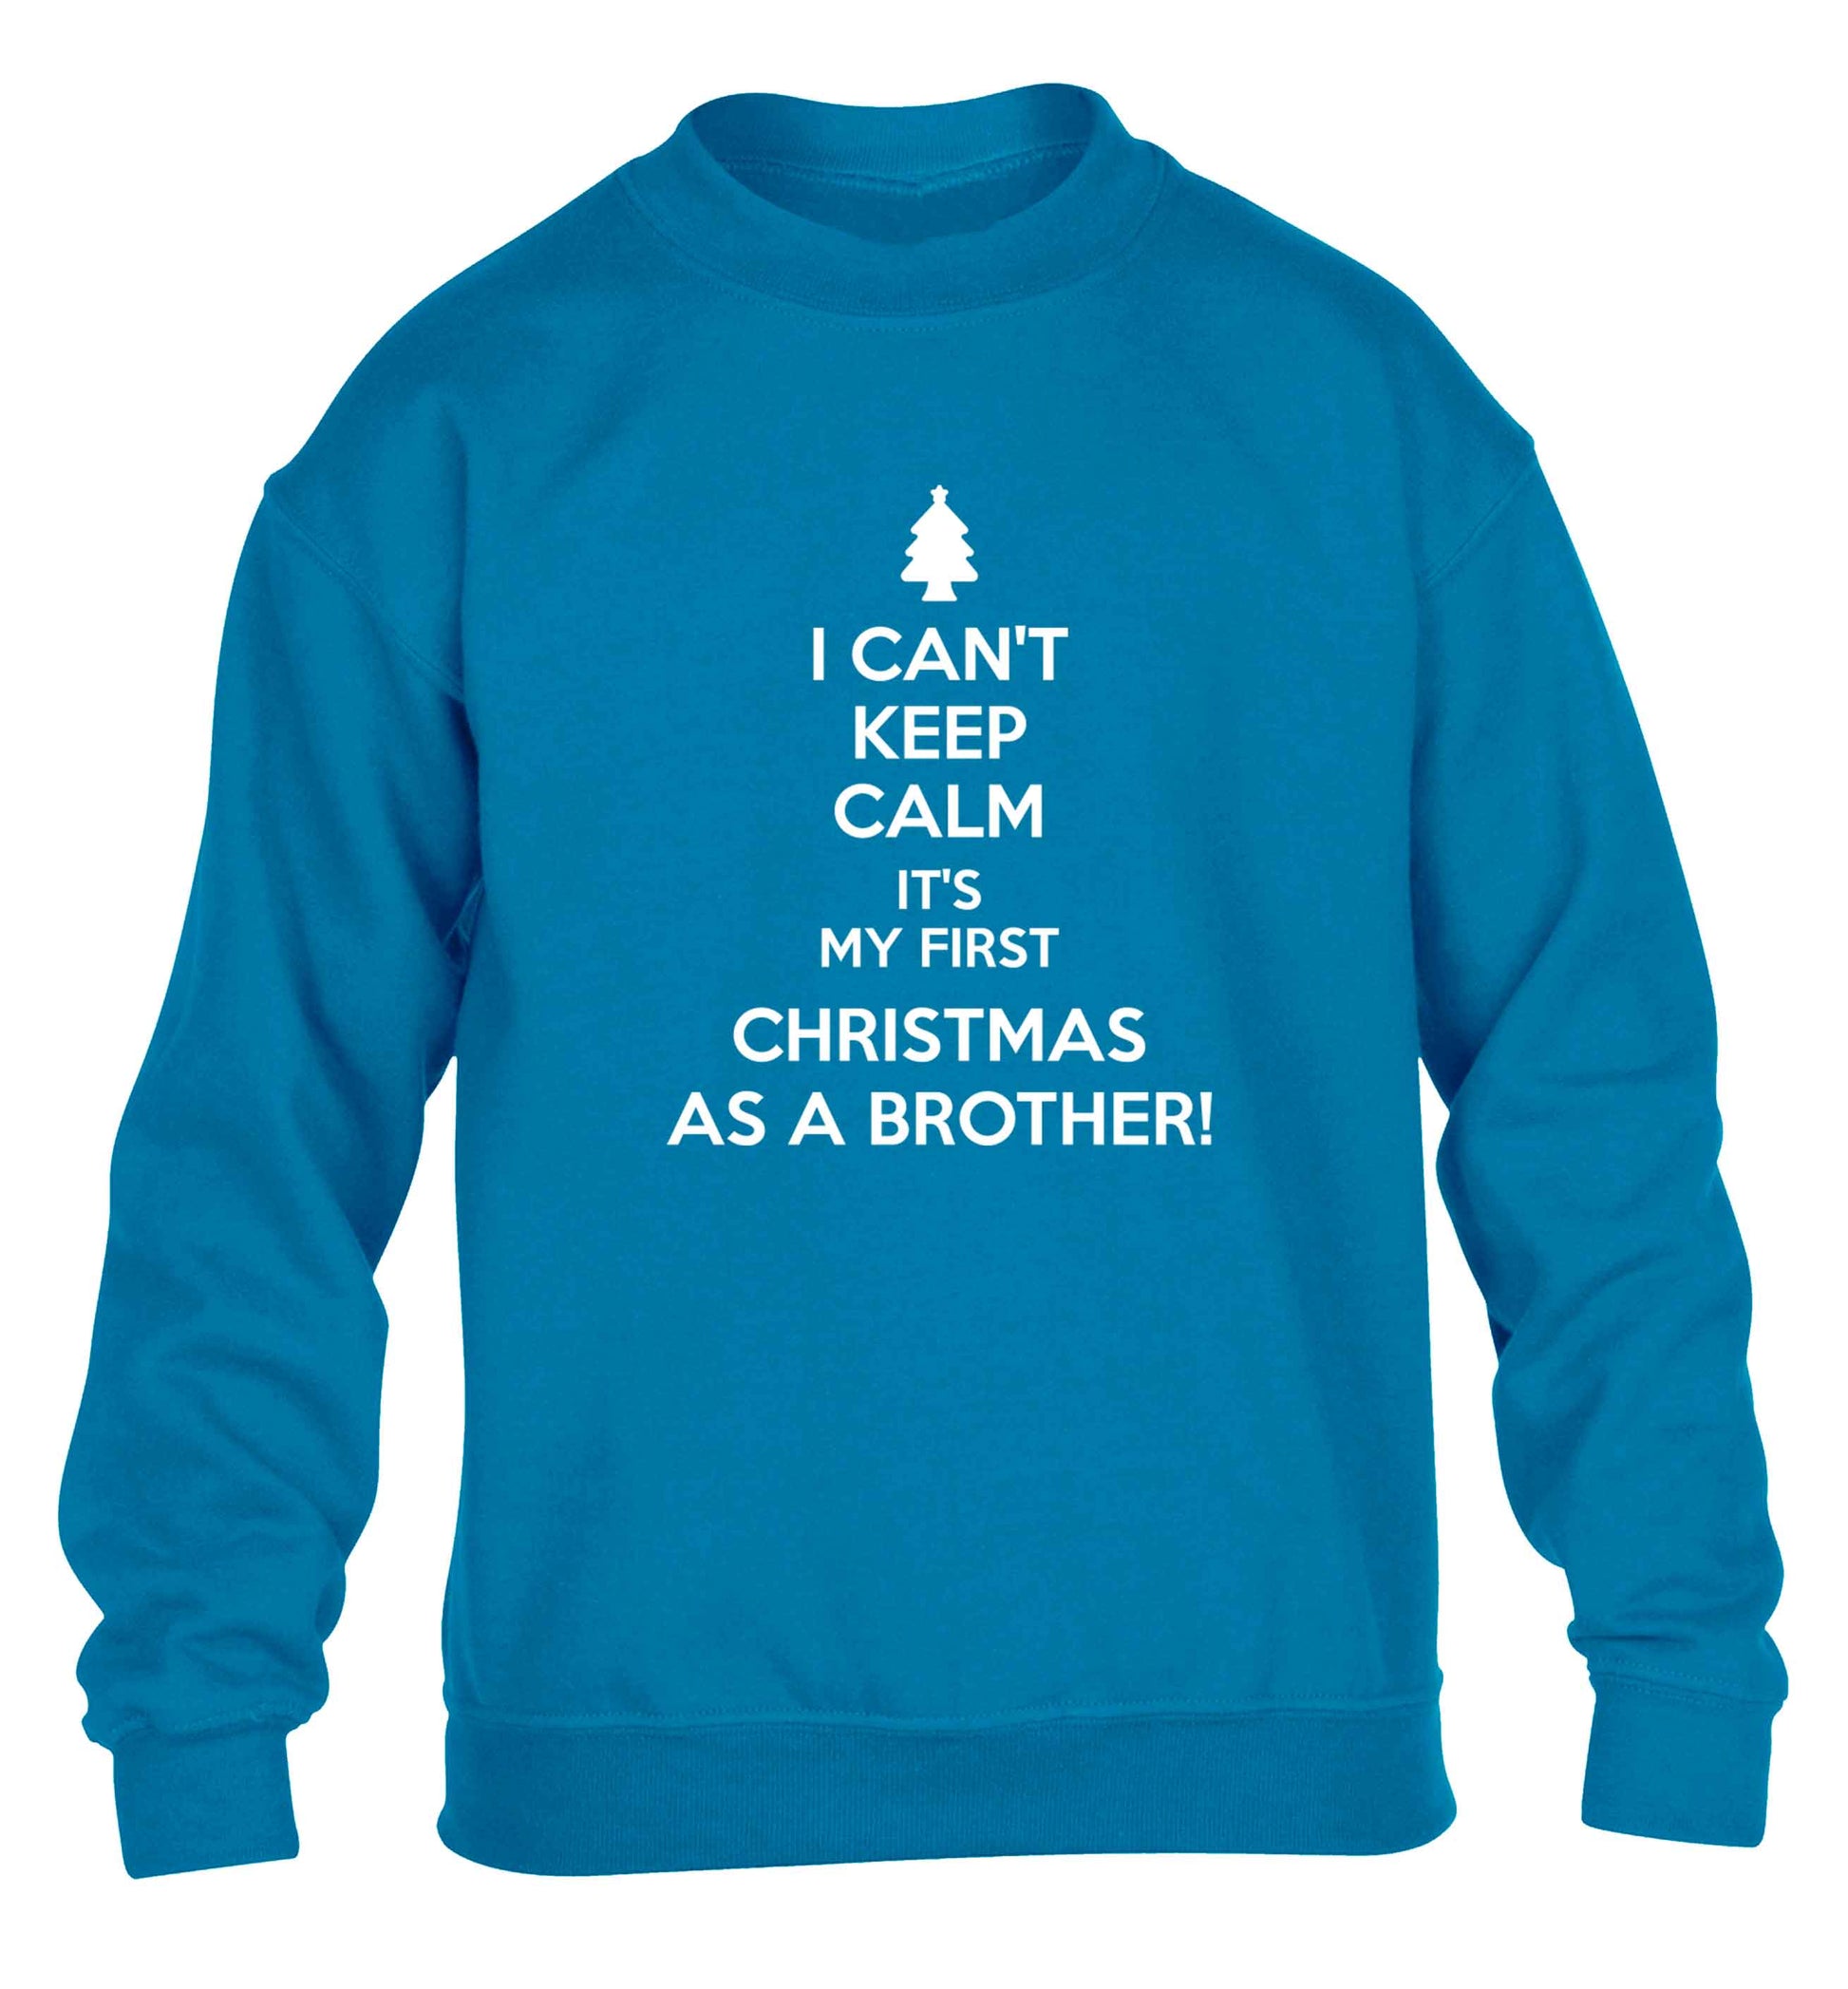 I can't keep calm it's my first Christmas as a brother! children's blue sweater 12-13 Years